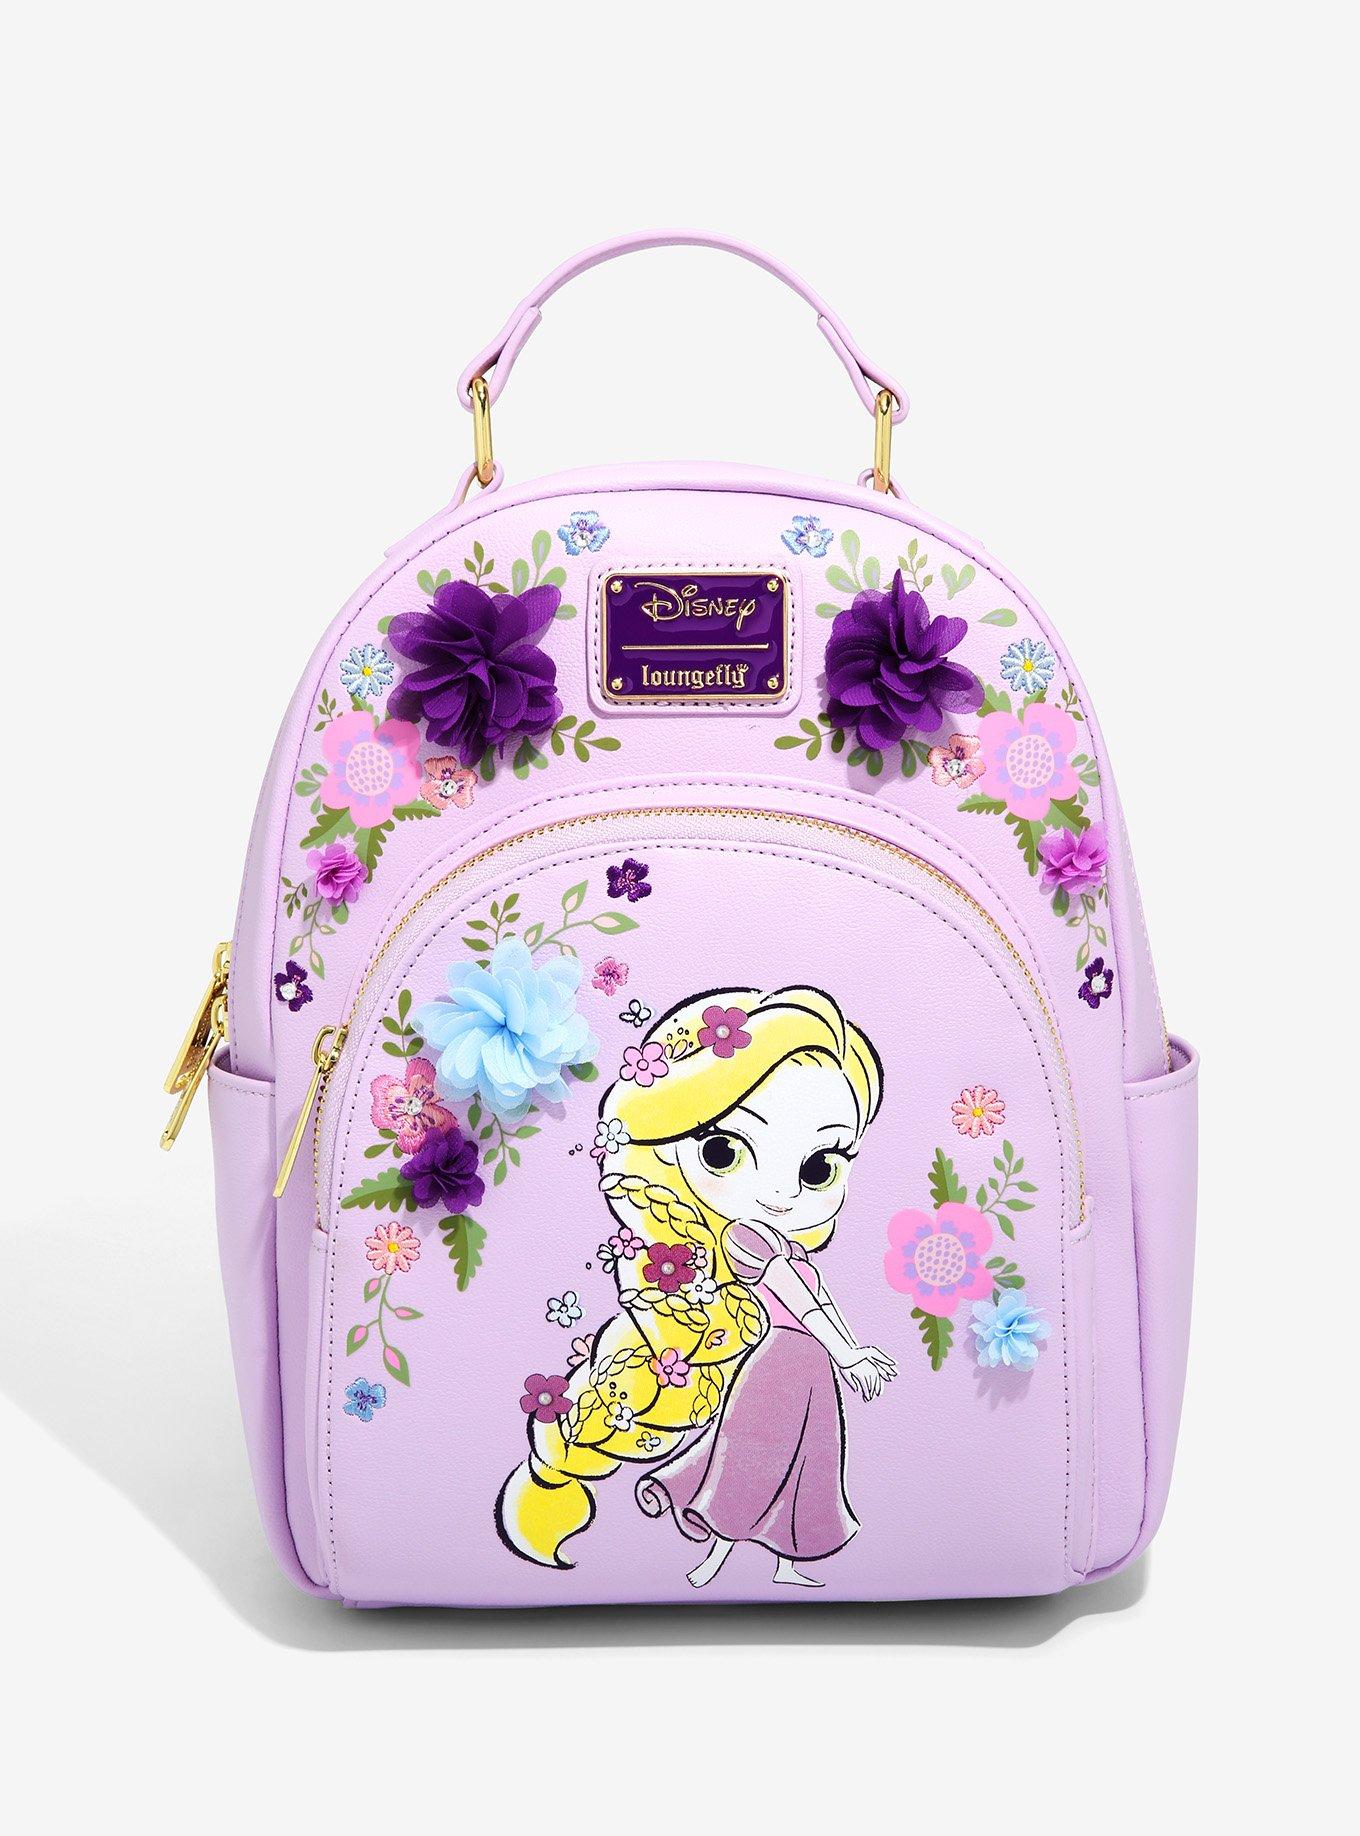 Loungefly Tangled Rapunzel Dreams Mini Backpack Limited Edition 1,700  Exclusive